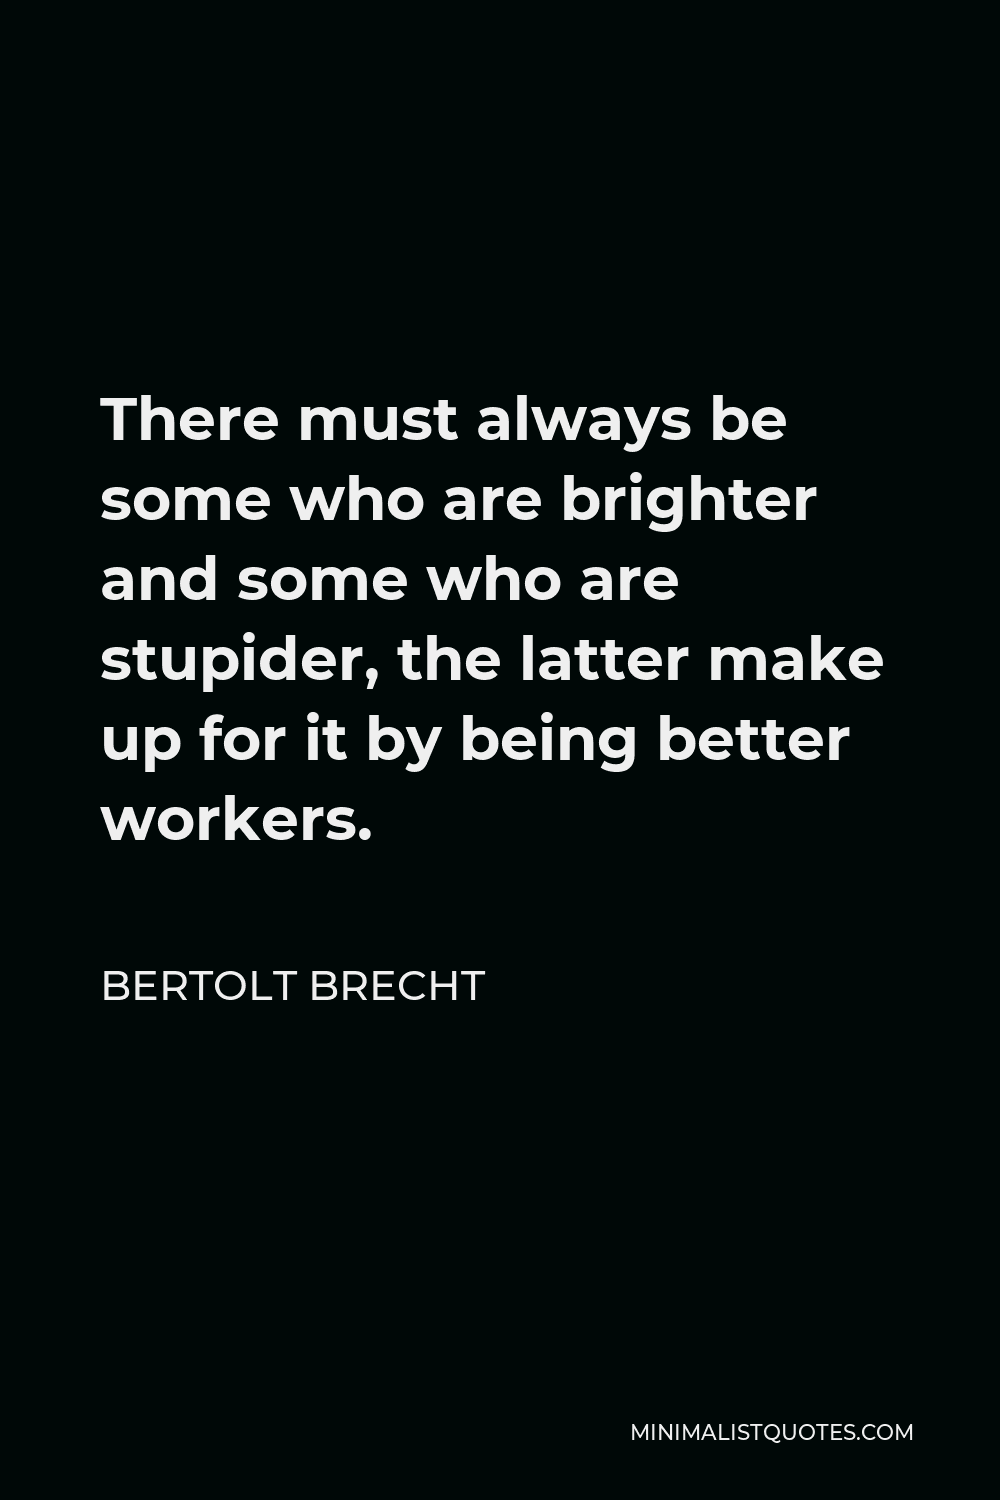 Bertolt Brecht Quote - There must always be some who are brighter and some who are stupider, the latter make up for it by being better workers.